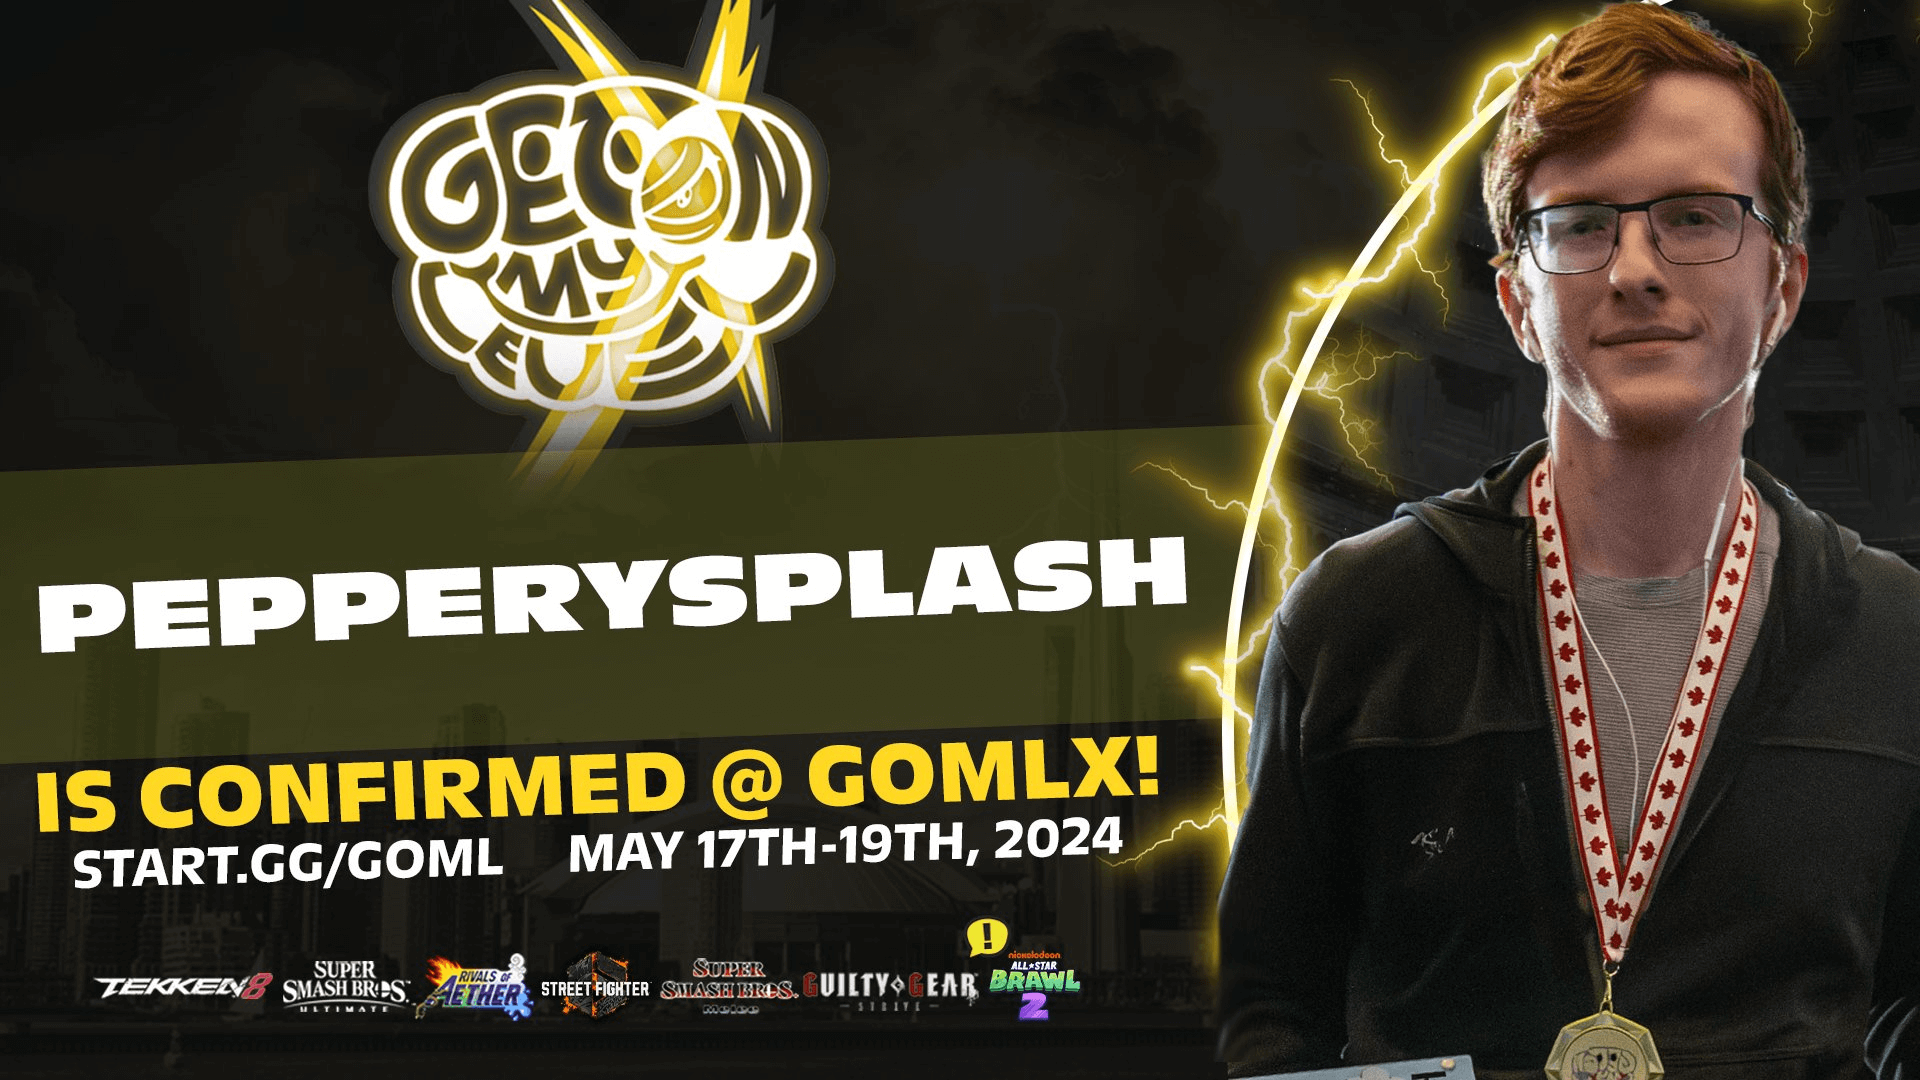 Top Canadian GGST Player PepperySplash Confirmed for GOML X